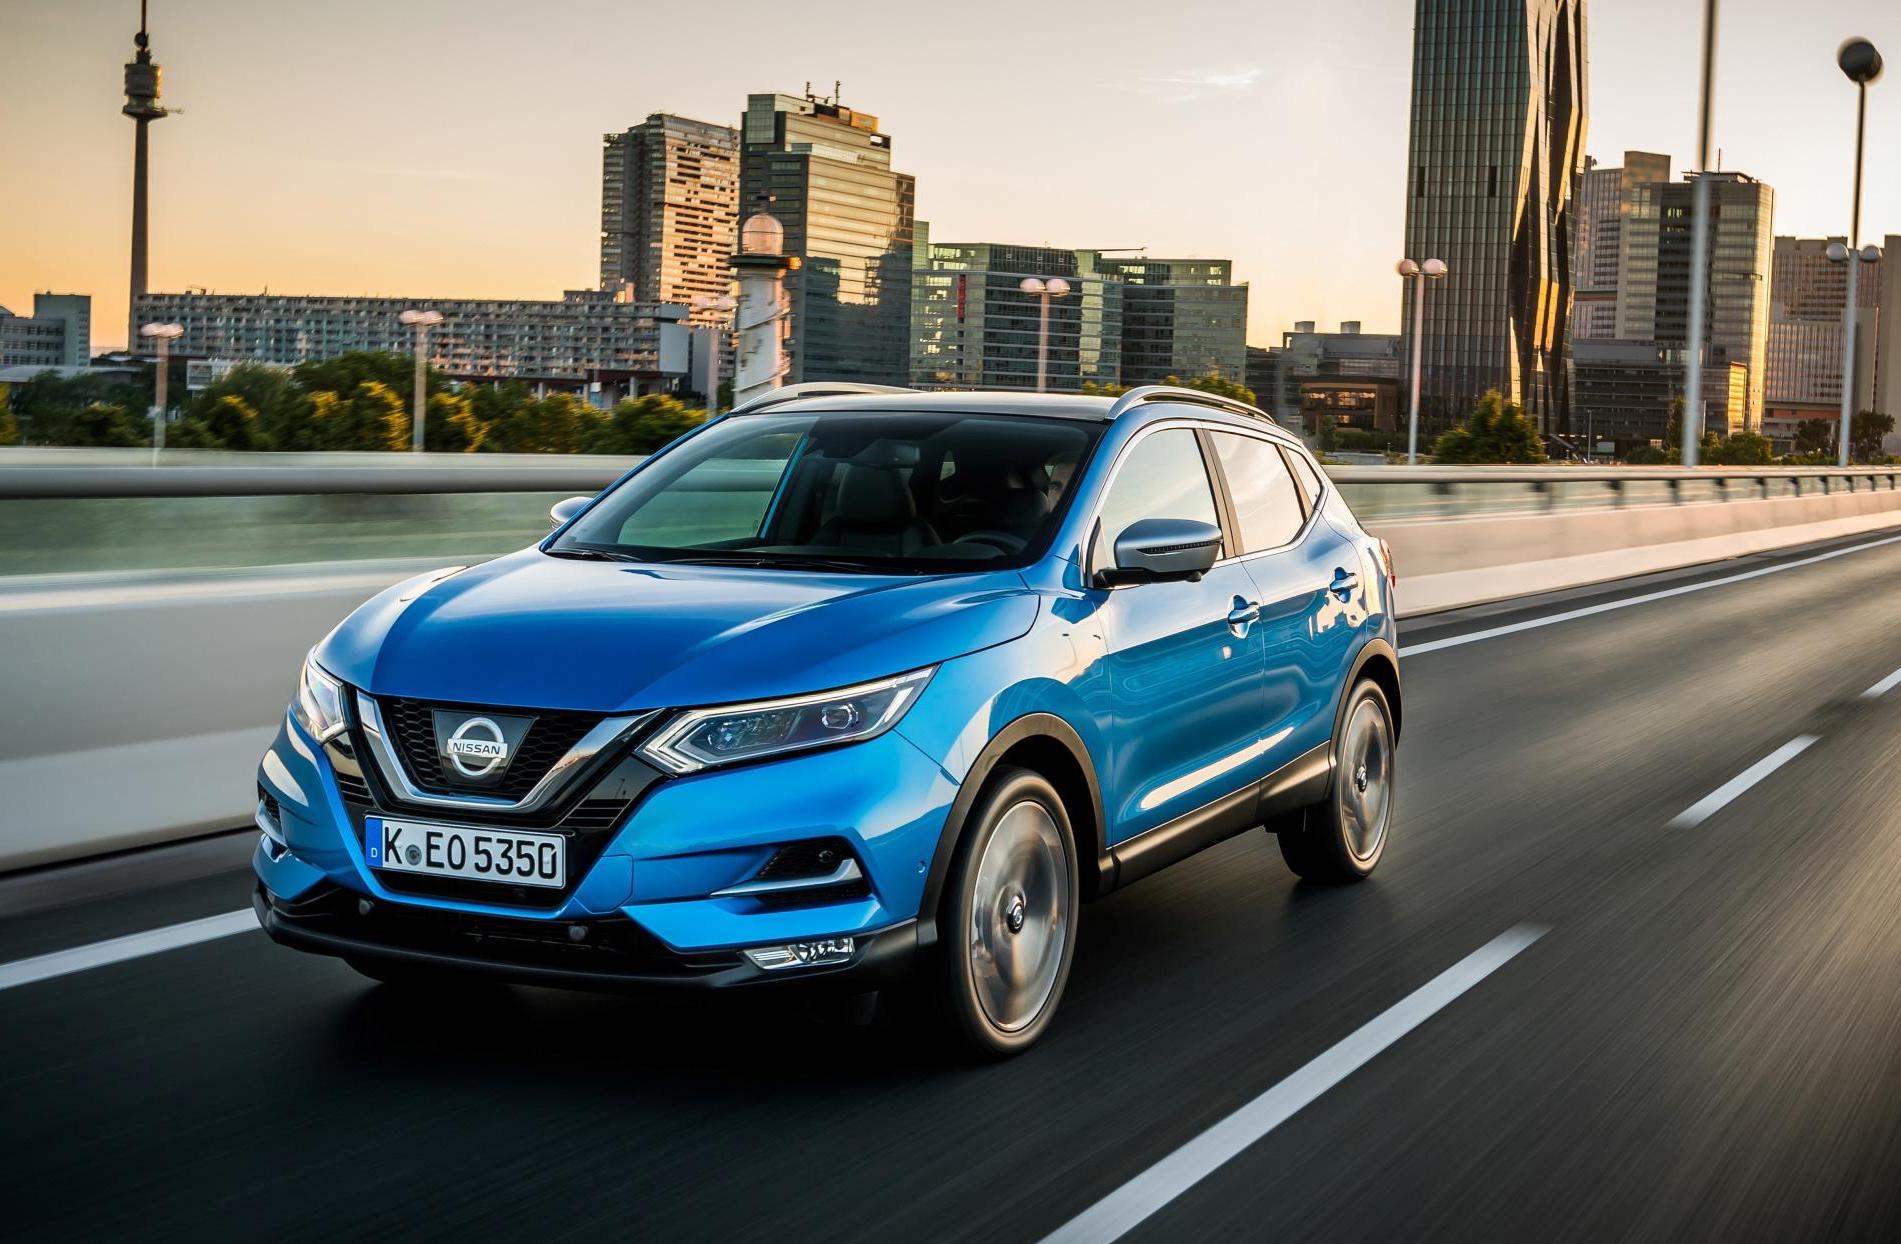 2018 Nissan Qashqai revealed in Euro specification